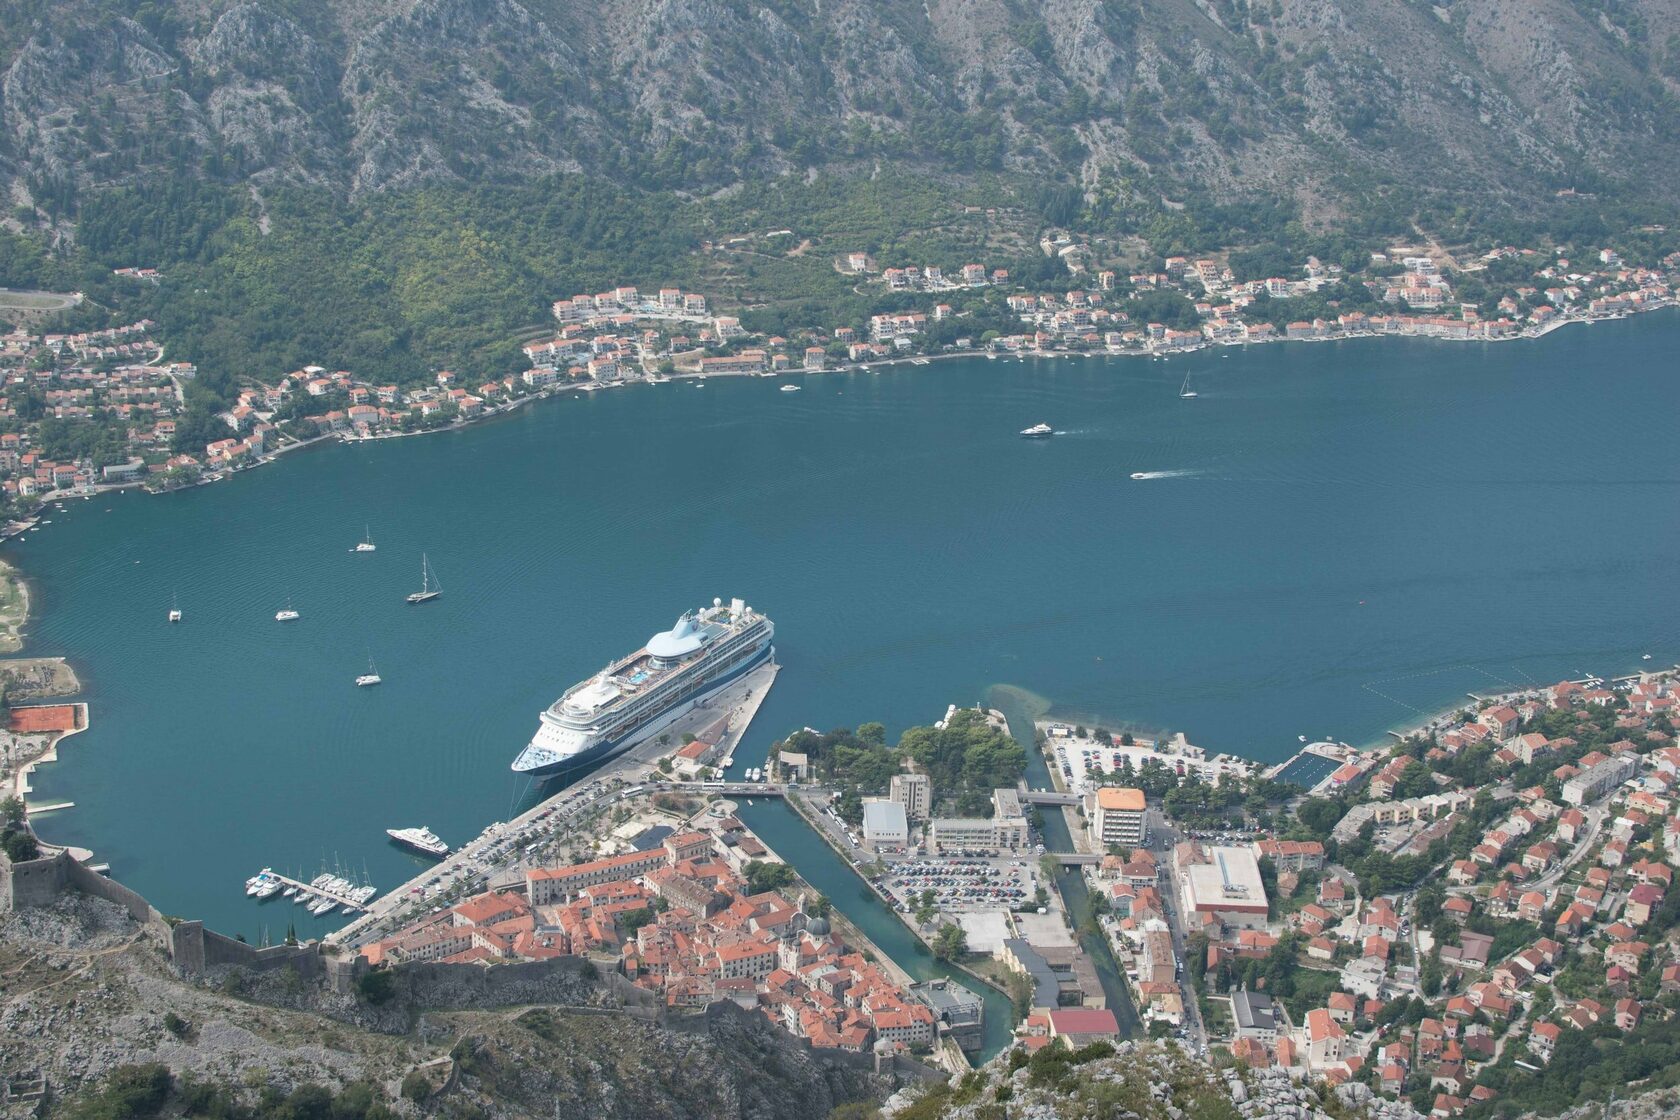  5-Best-things-to-do-in-kotor-from-a-cruise-ship-kotor-excursions